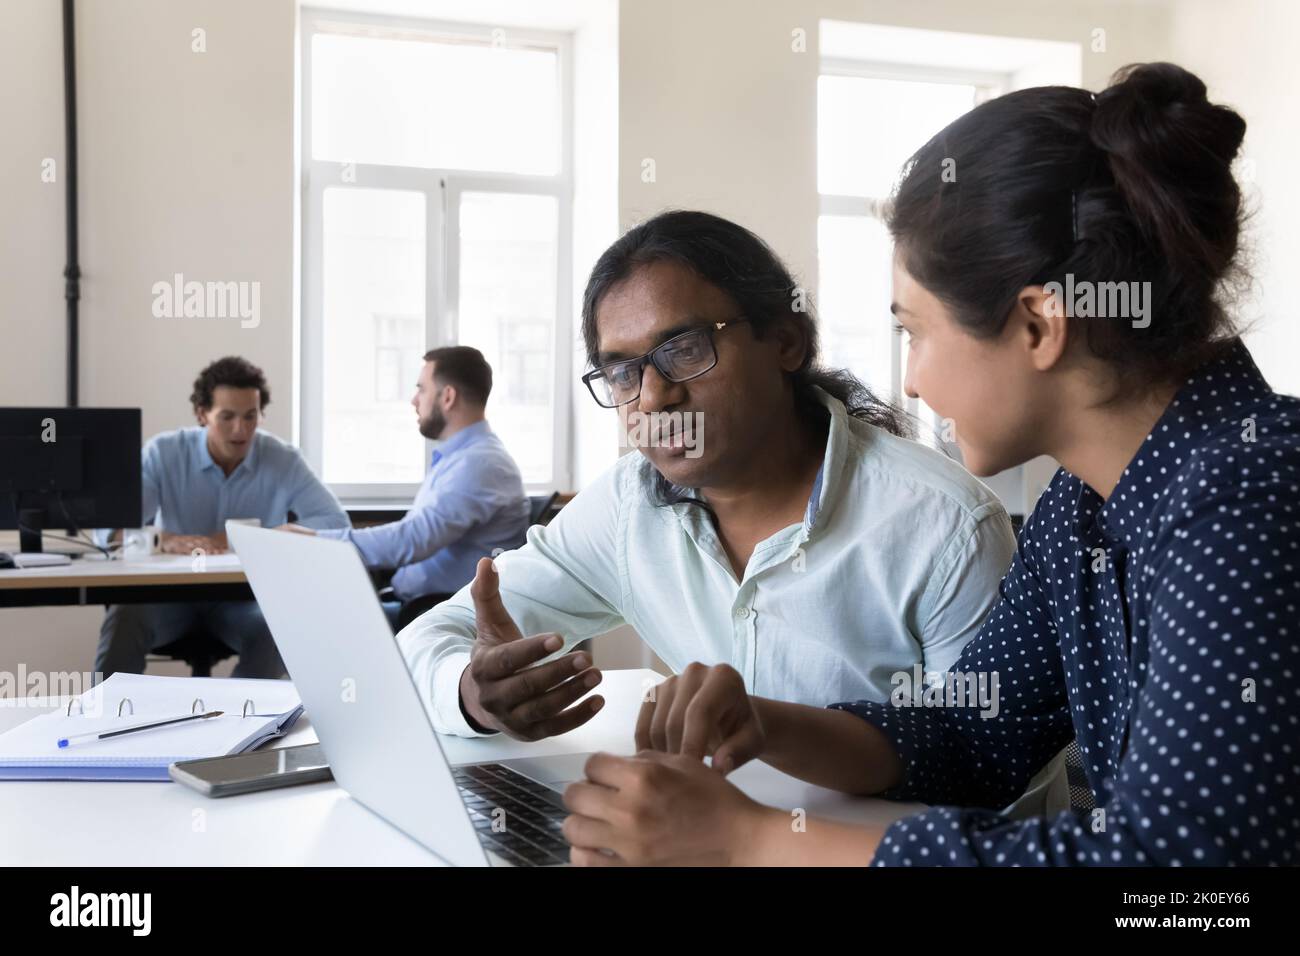 Two Indian employees collaborating on project, sitting at work table Stock Photo